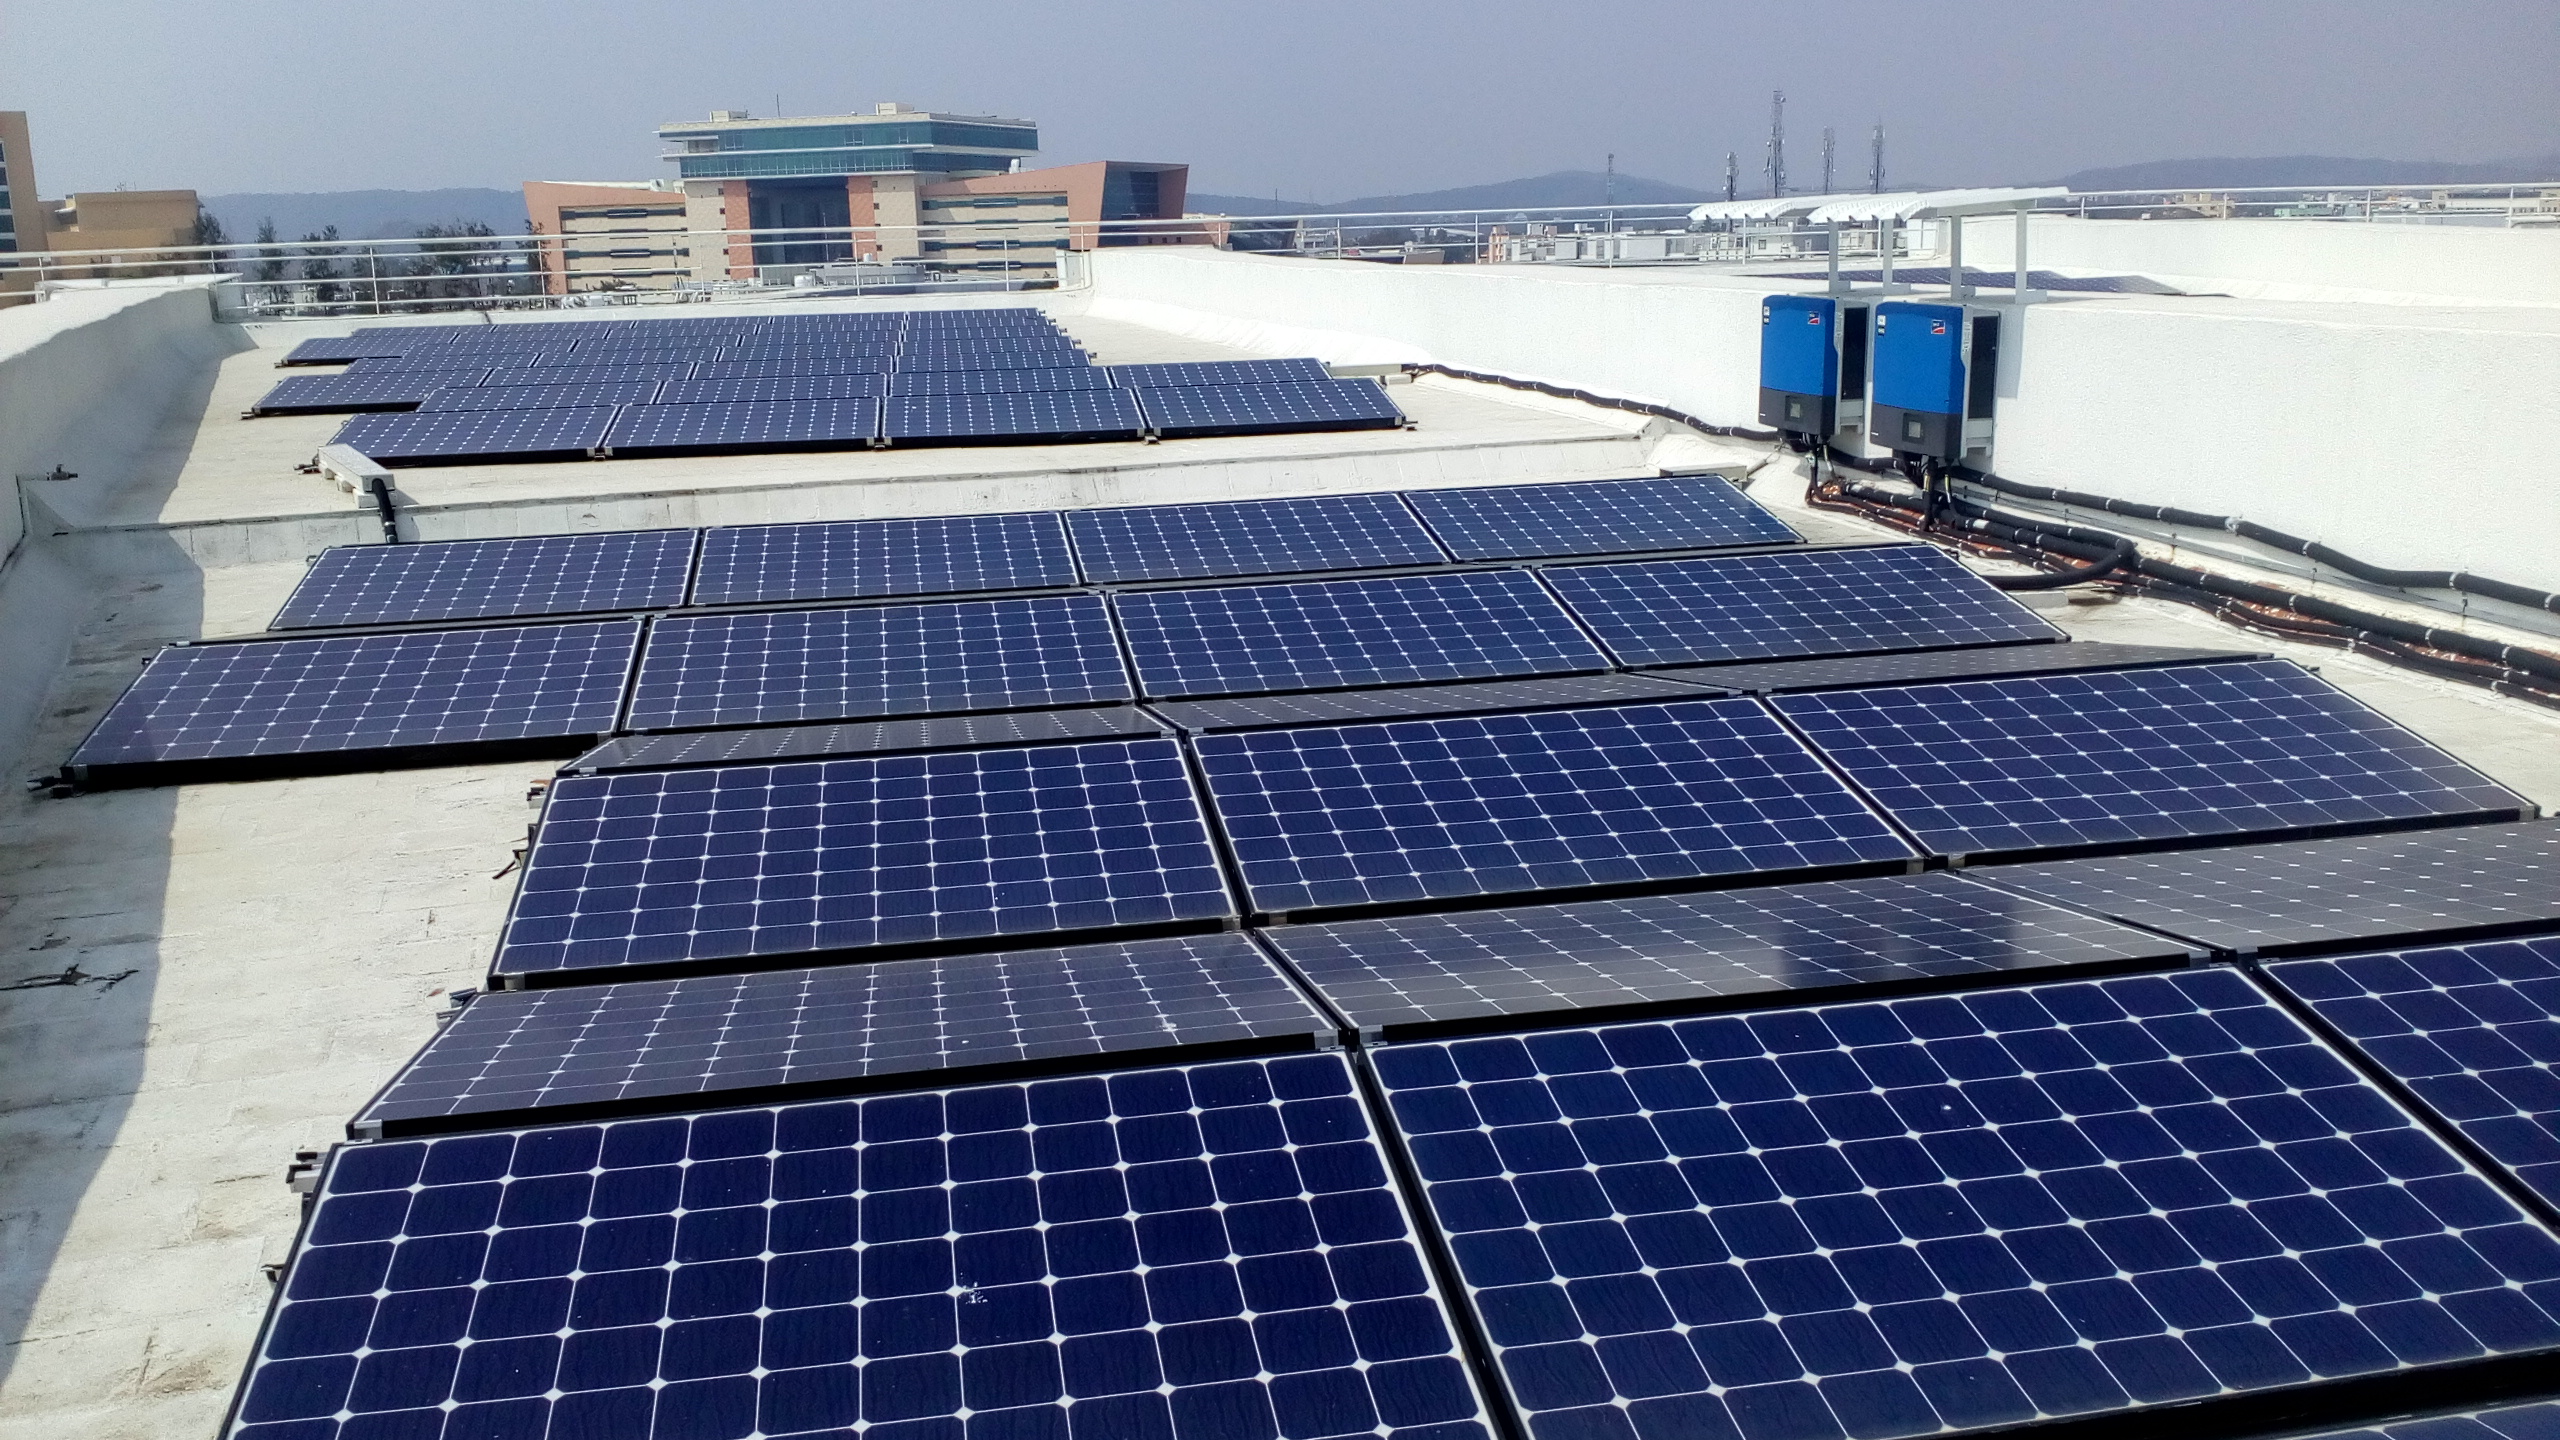 Solar panel installed in east west orientation at Infosys Mahindra city site